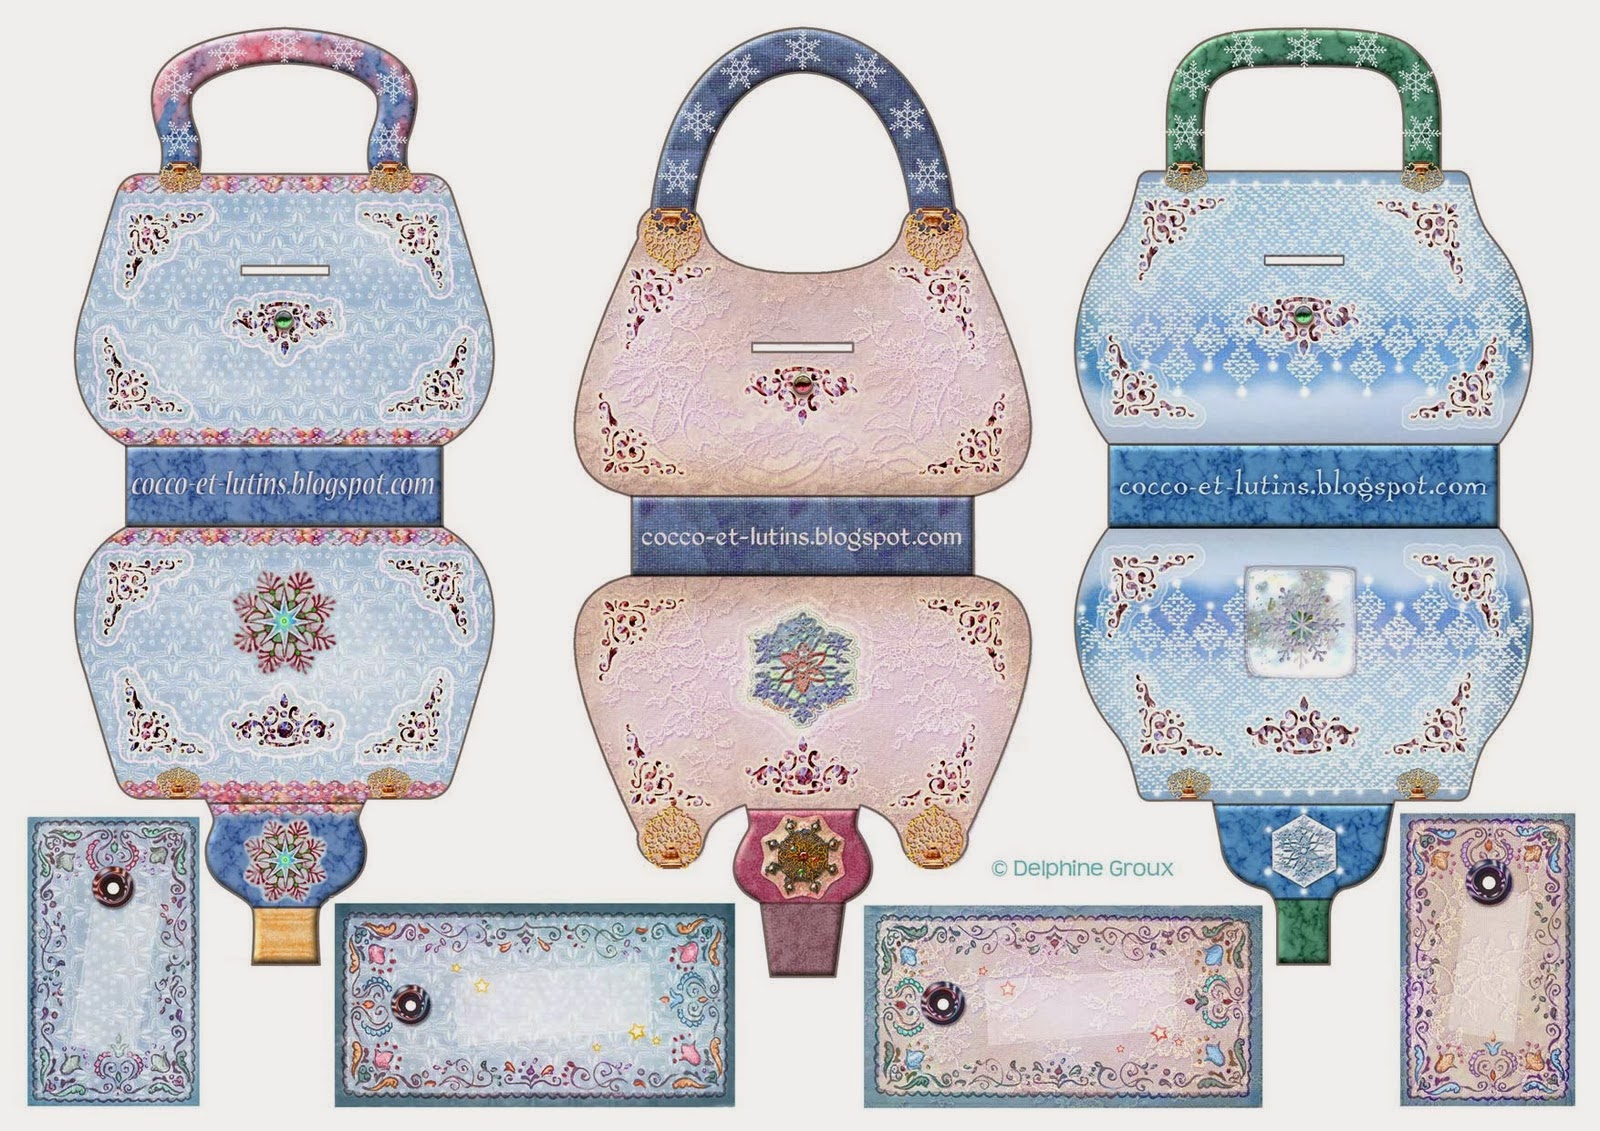 Louis Vuitton: Free Printable Paper Purses - Oh My Fiesta! in english